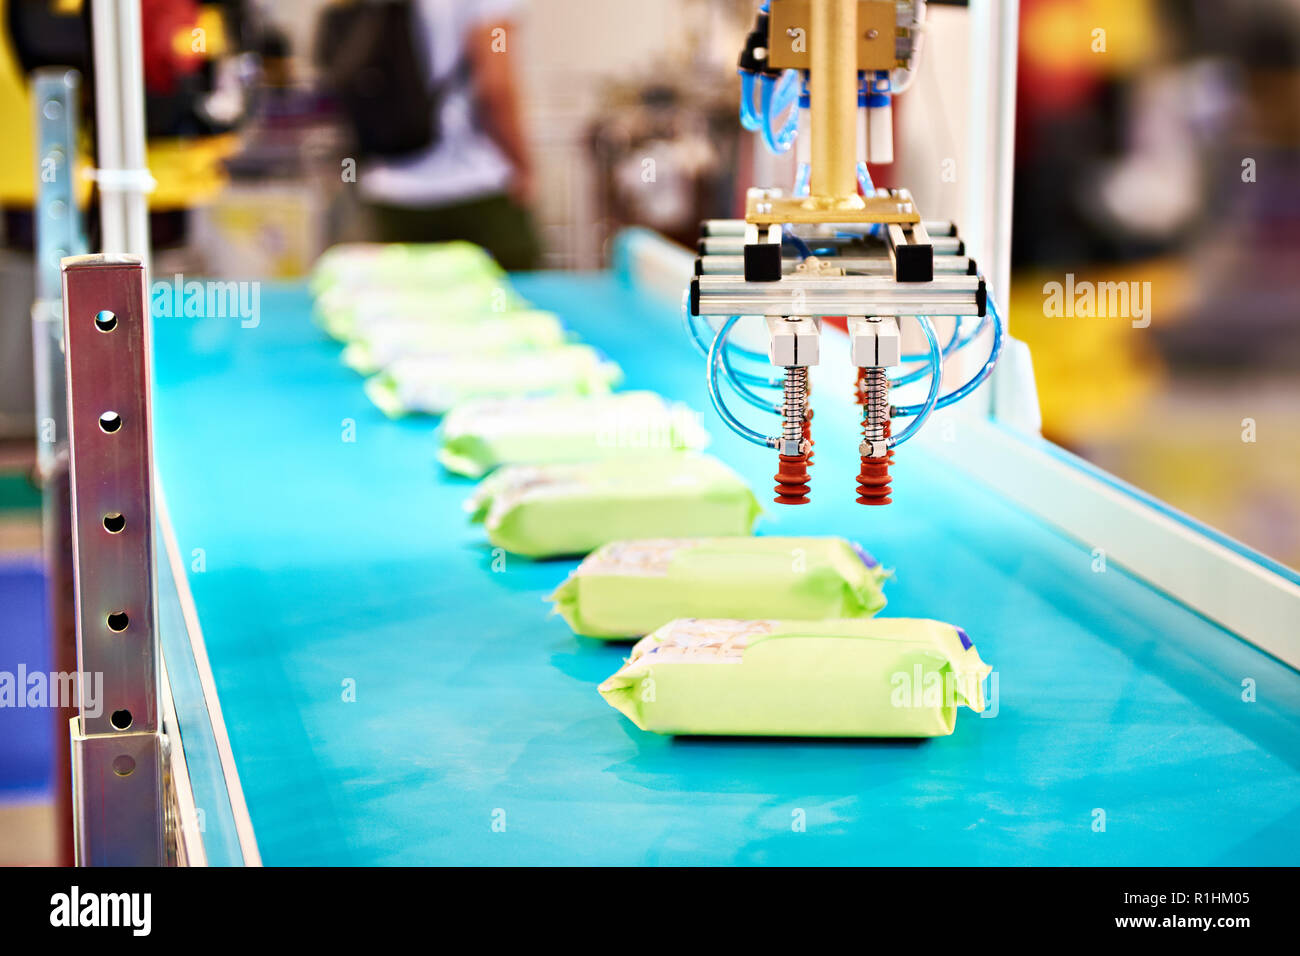 Hand robot manipulator for packaging products on conveyor Stock Photo